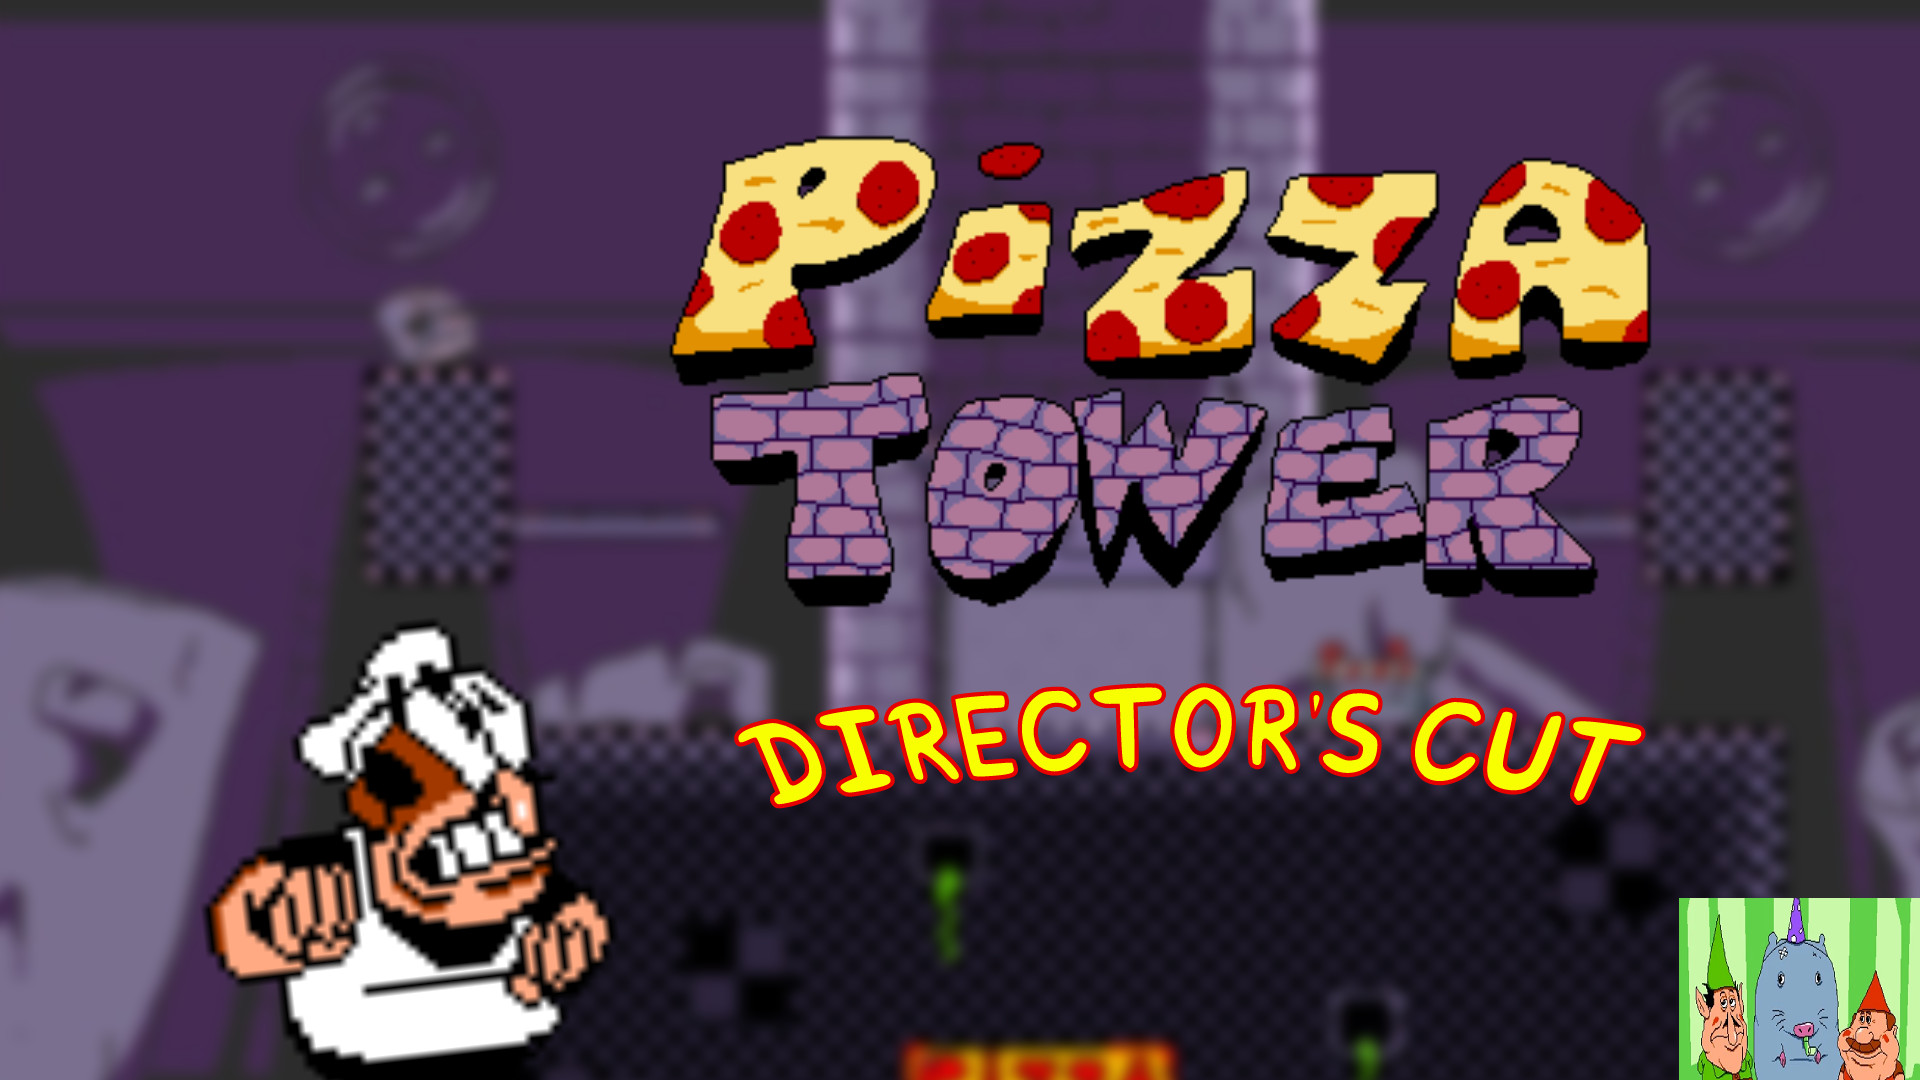 Pizza Tower Game for Android - Download